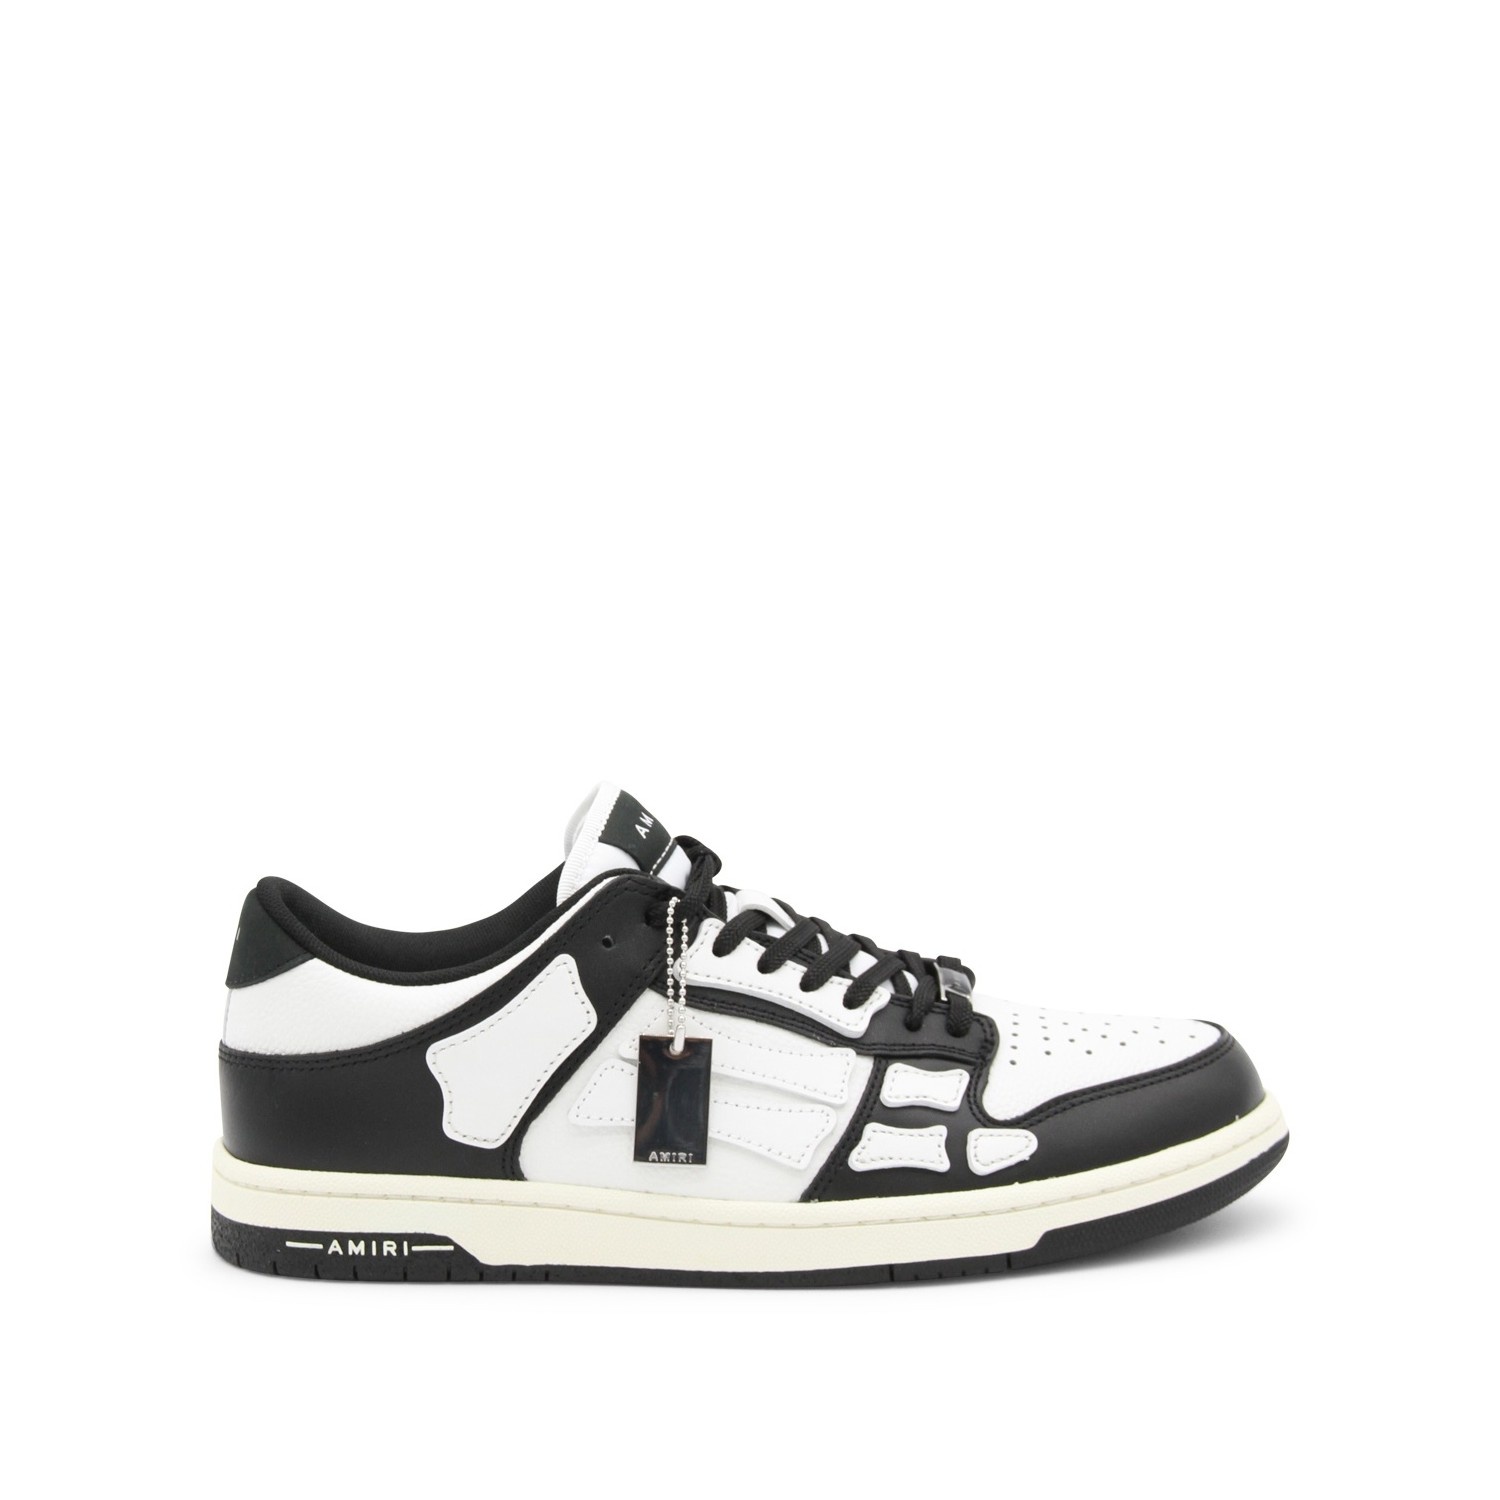 BLACK AND WHITE LEATHER SKEL SNEAKERS - 1